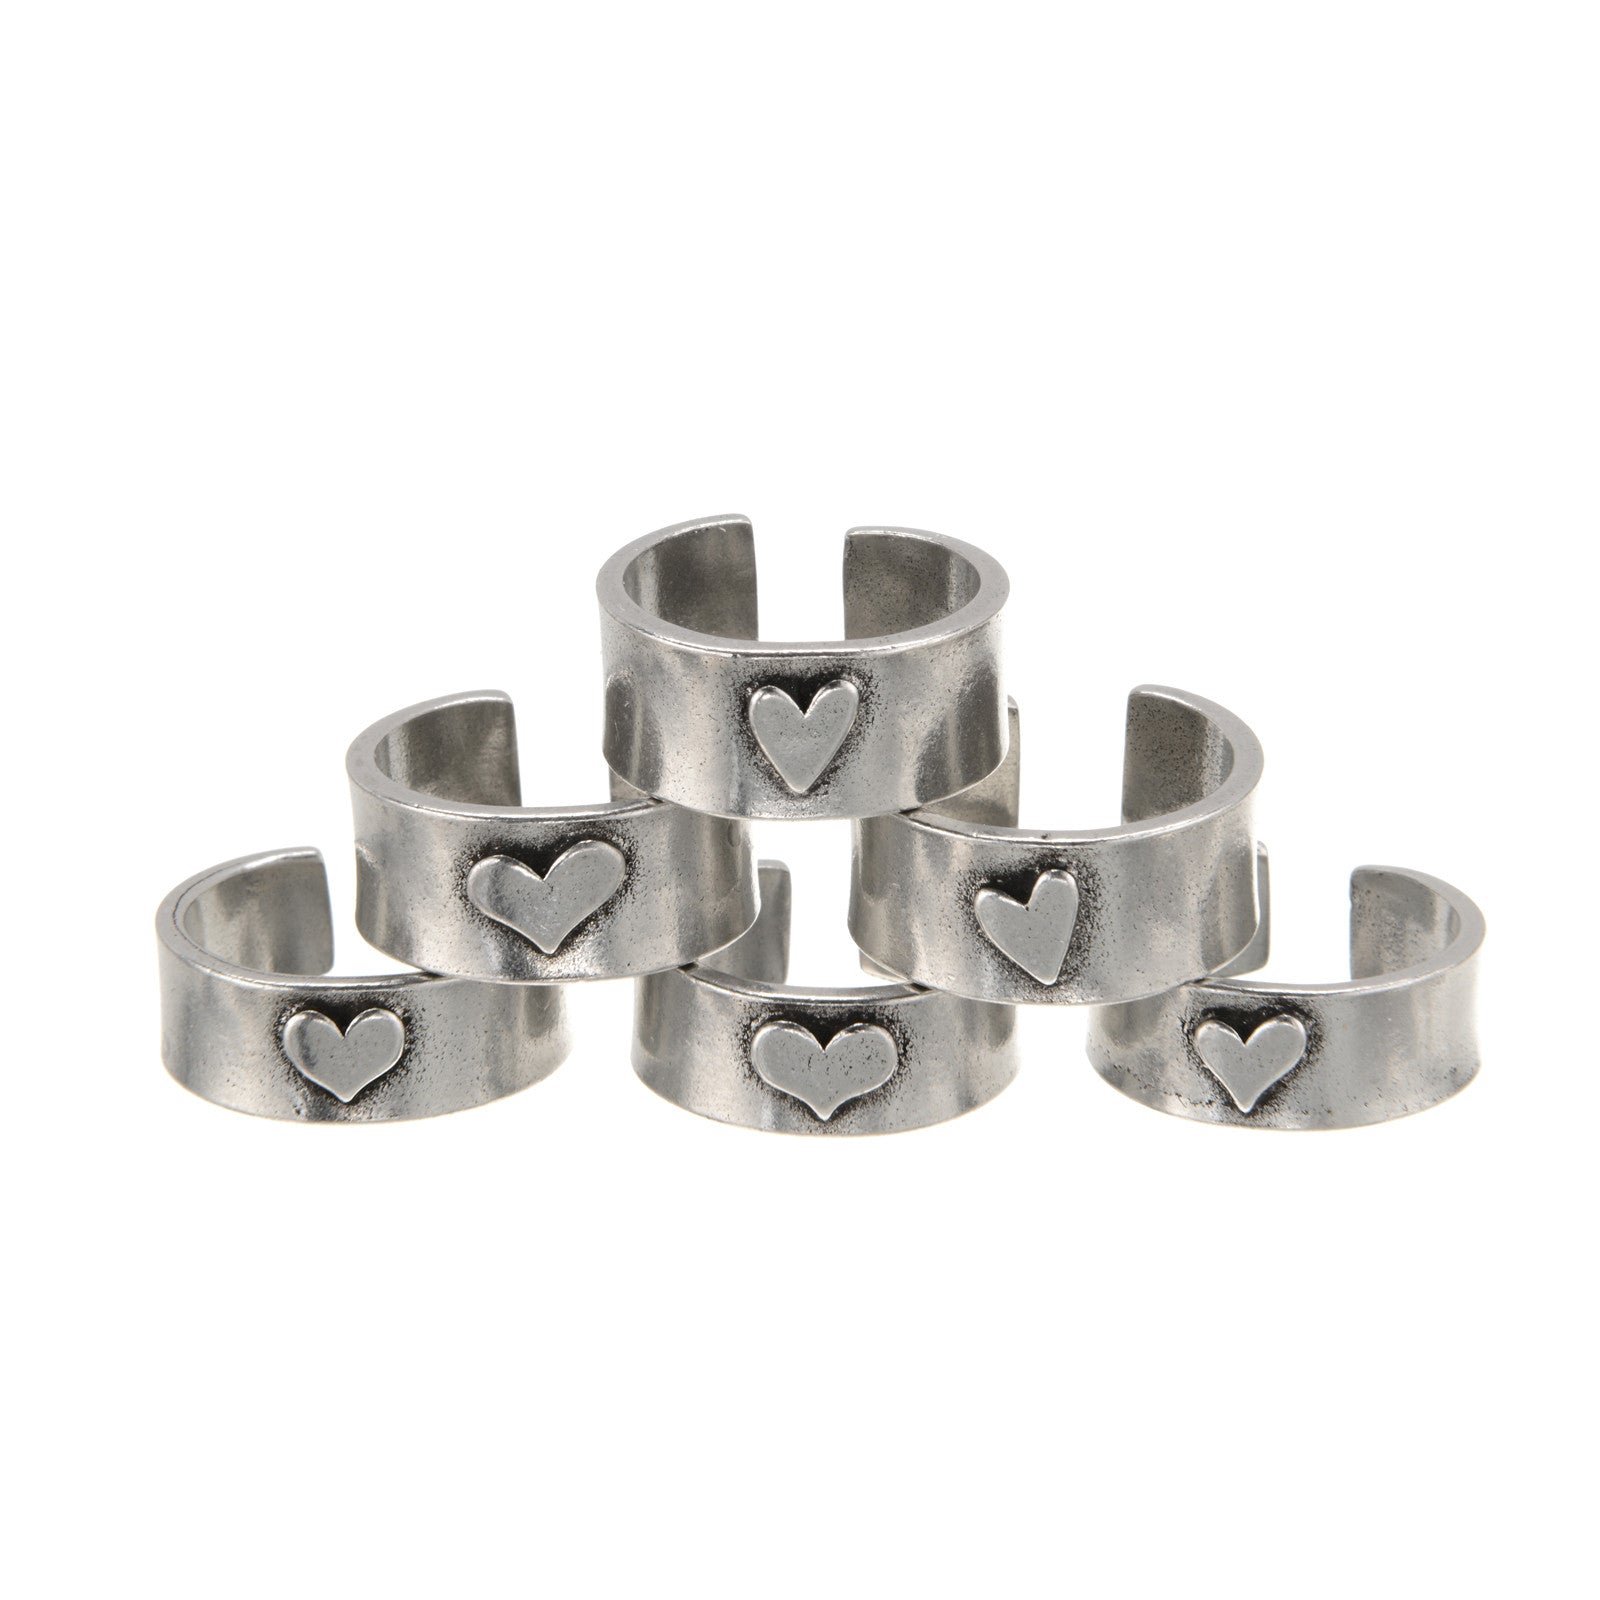 Stacked "Hearts of Gold" PEACEFUL HEART Ring